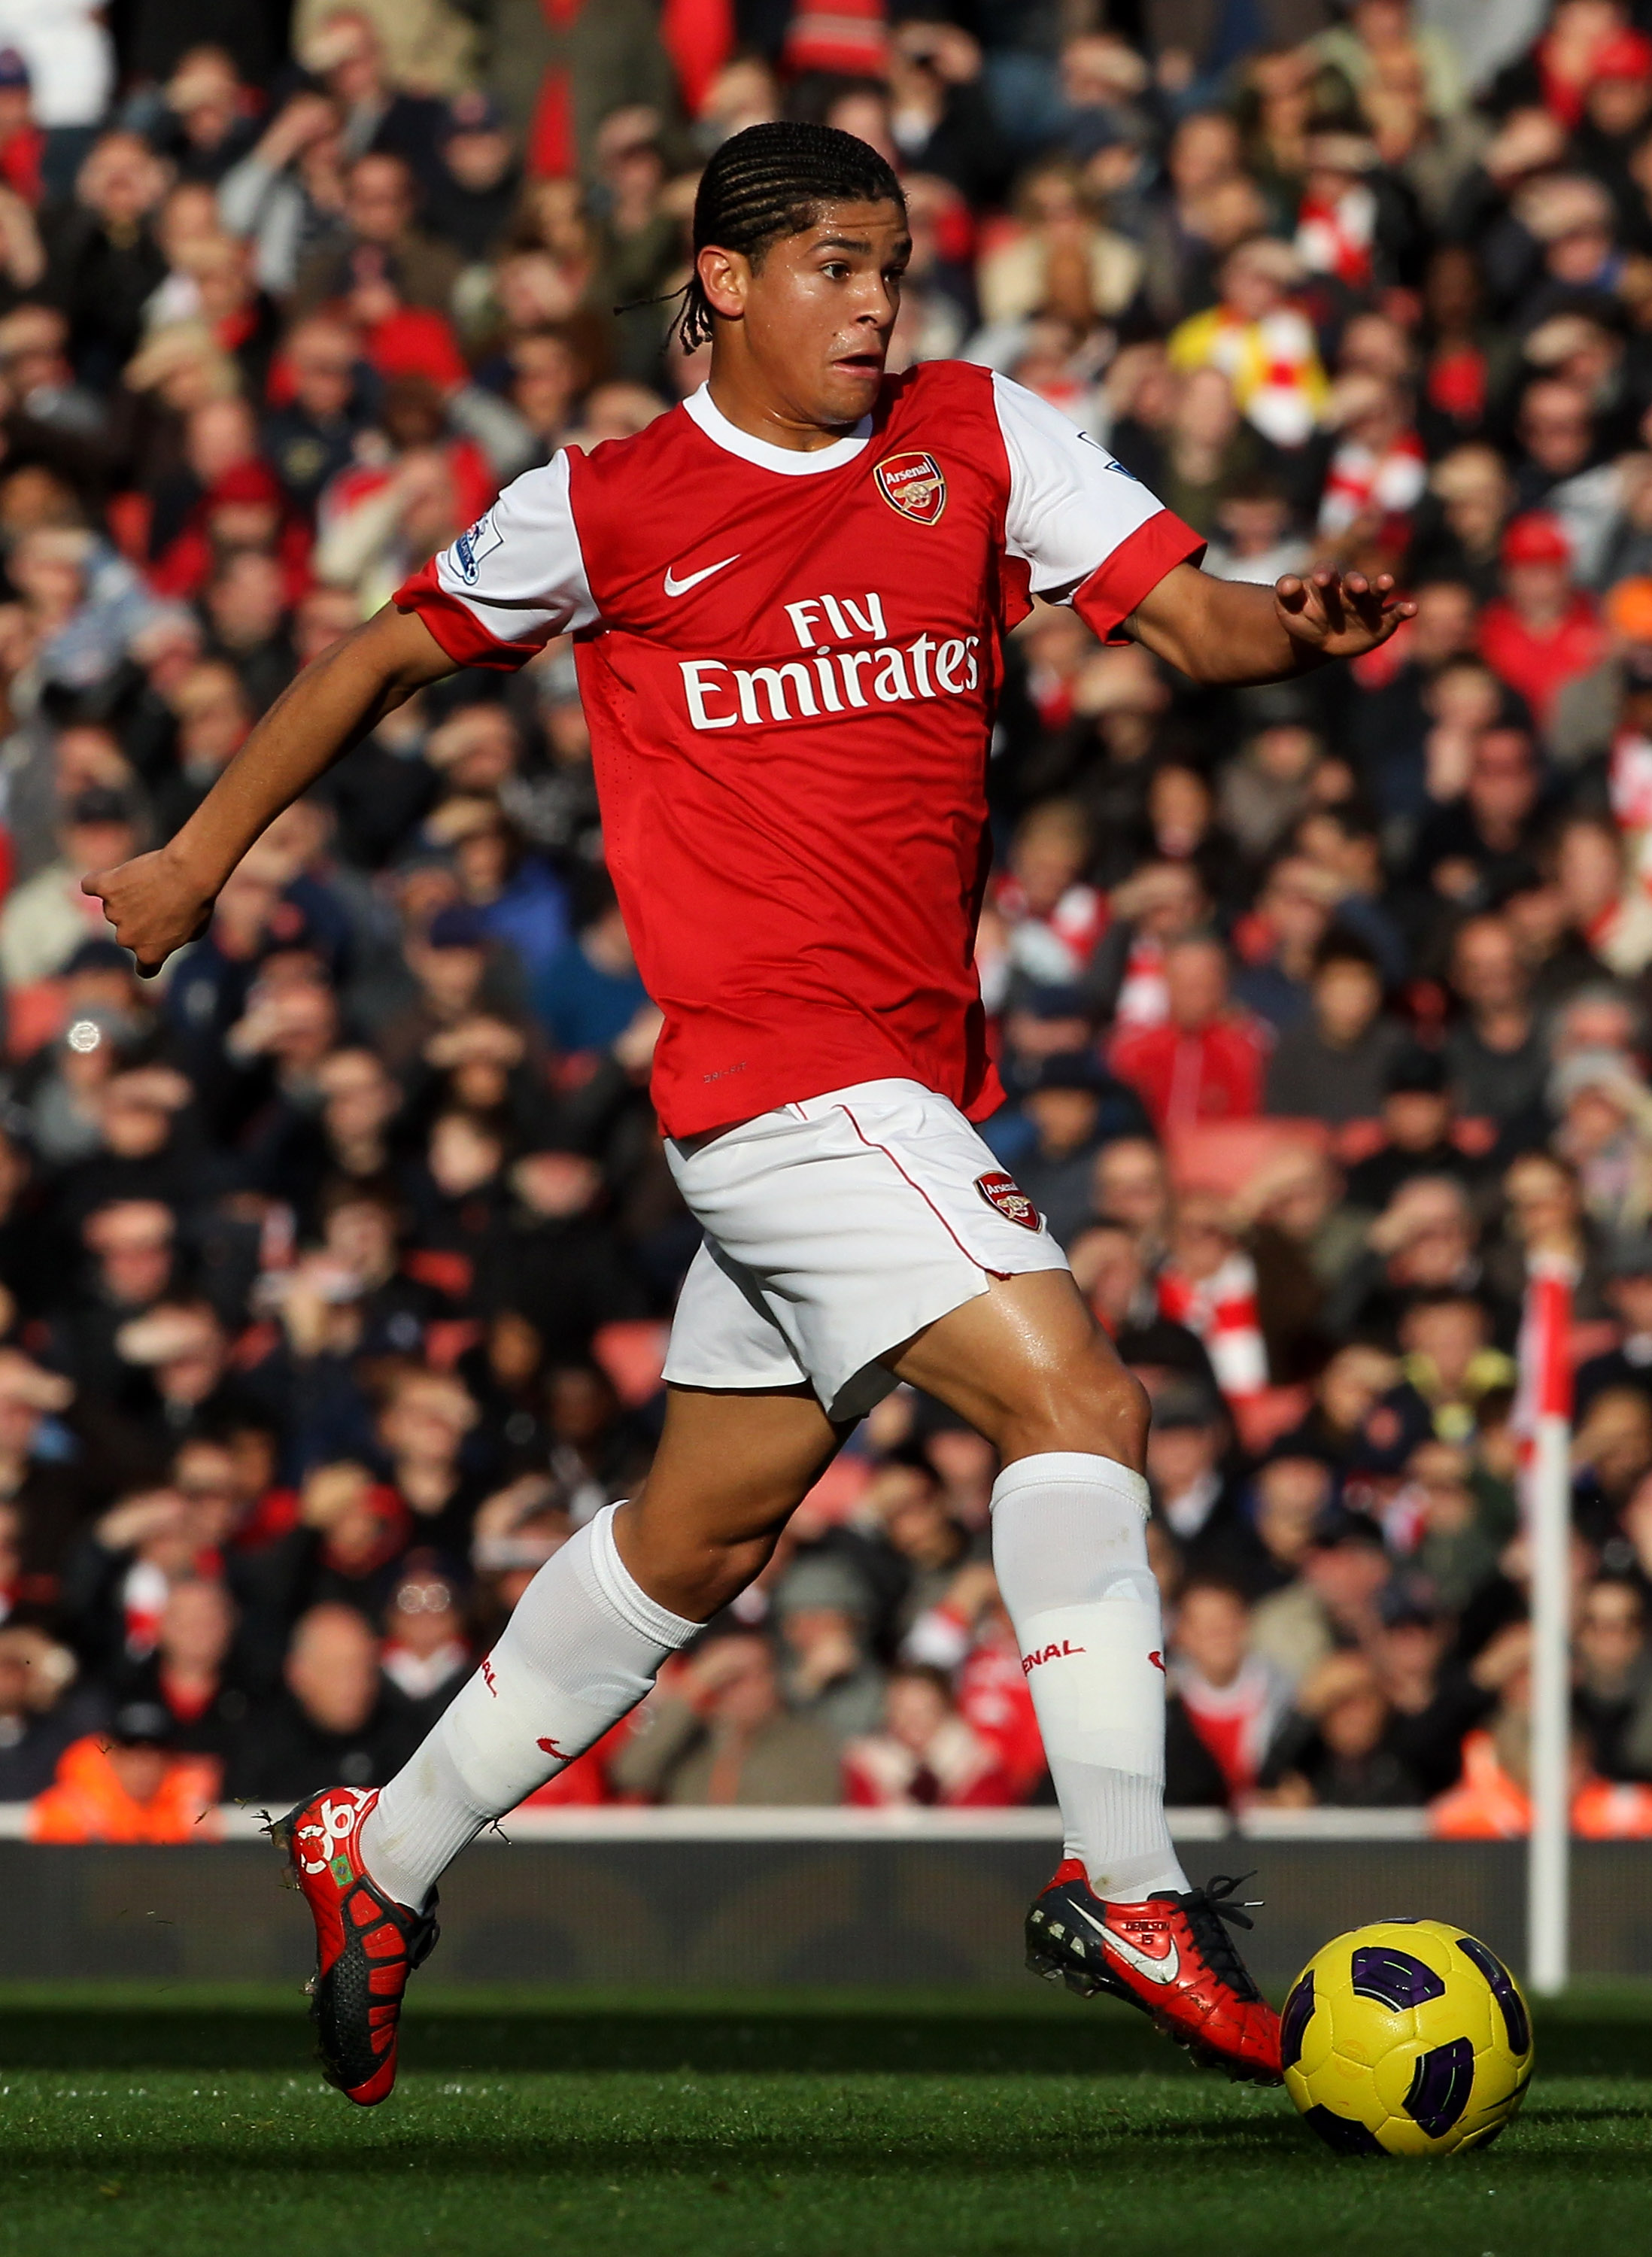 LONDON, ENGLAND - OCTOBER 30:  Neves Denilson of Arsenal in action during the Barclays Premier League match between Arsenal and West Ham United at Emirates Stadium on October 30, 2010 in London, England.  (Photo by Clive Rose/Getty Images)